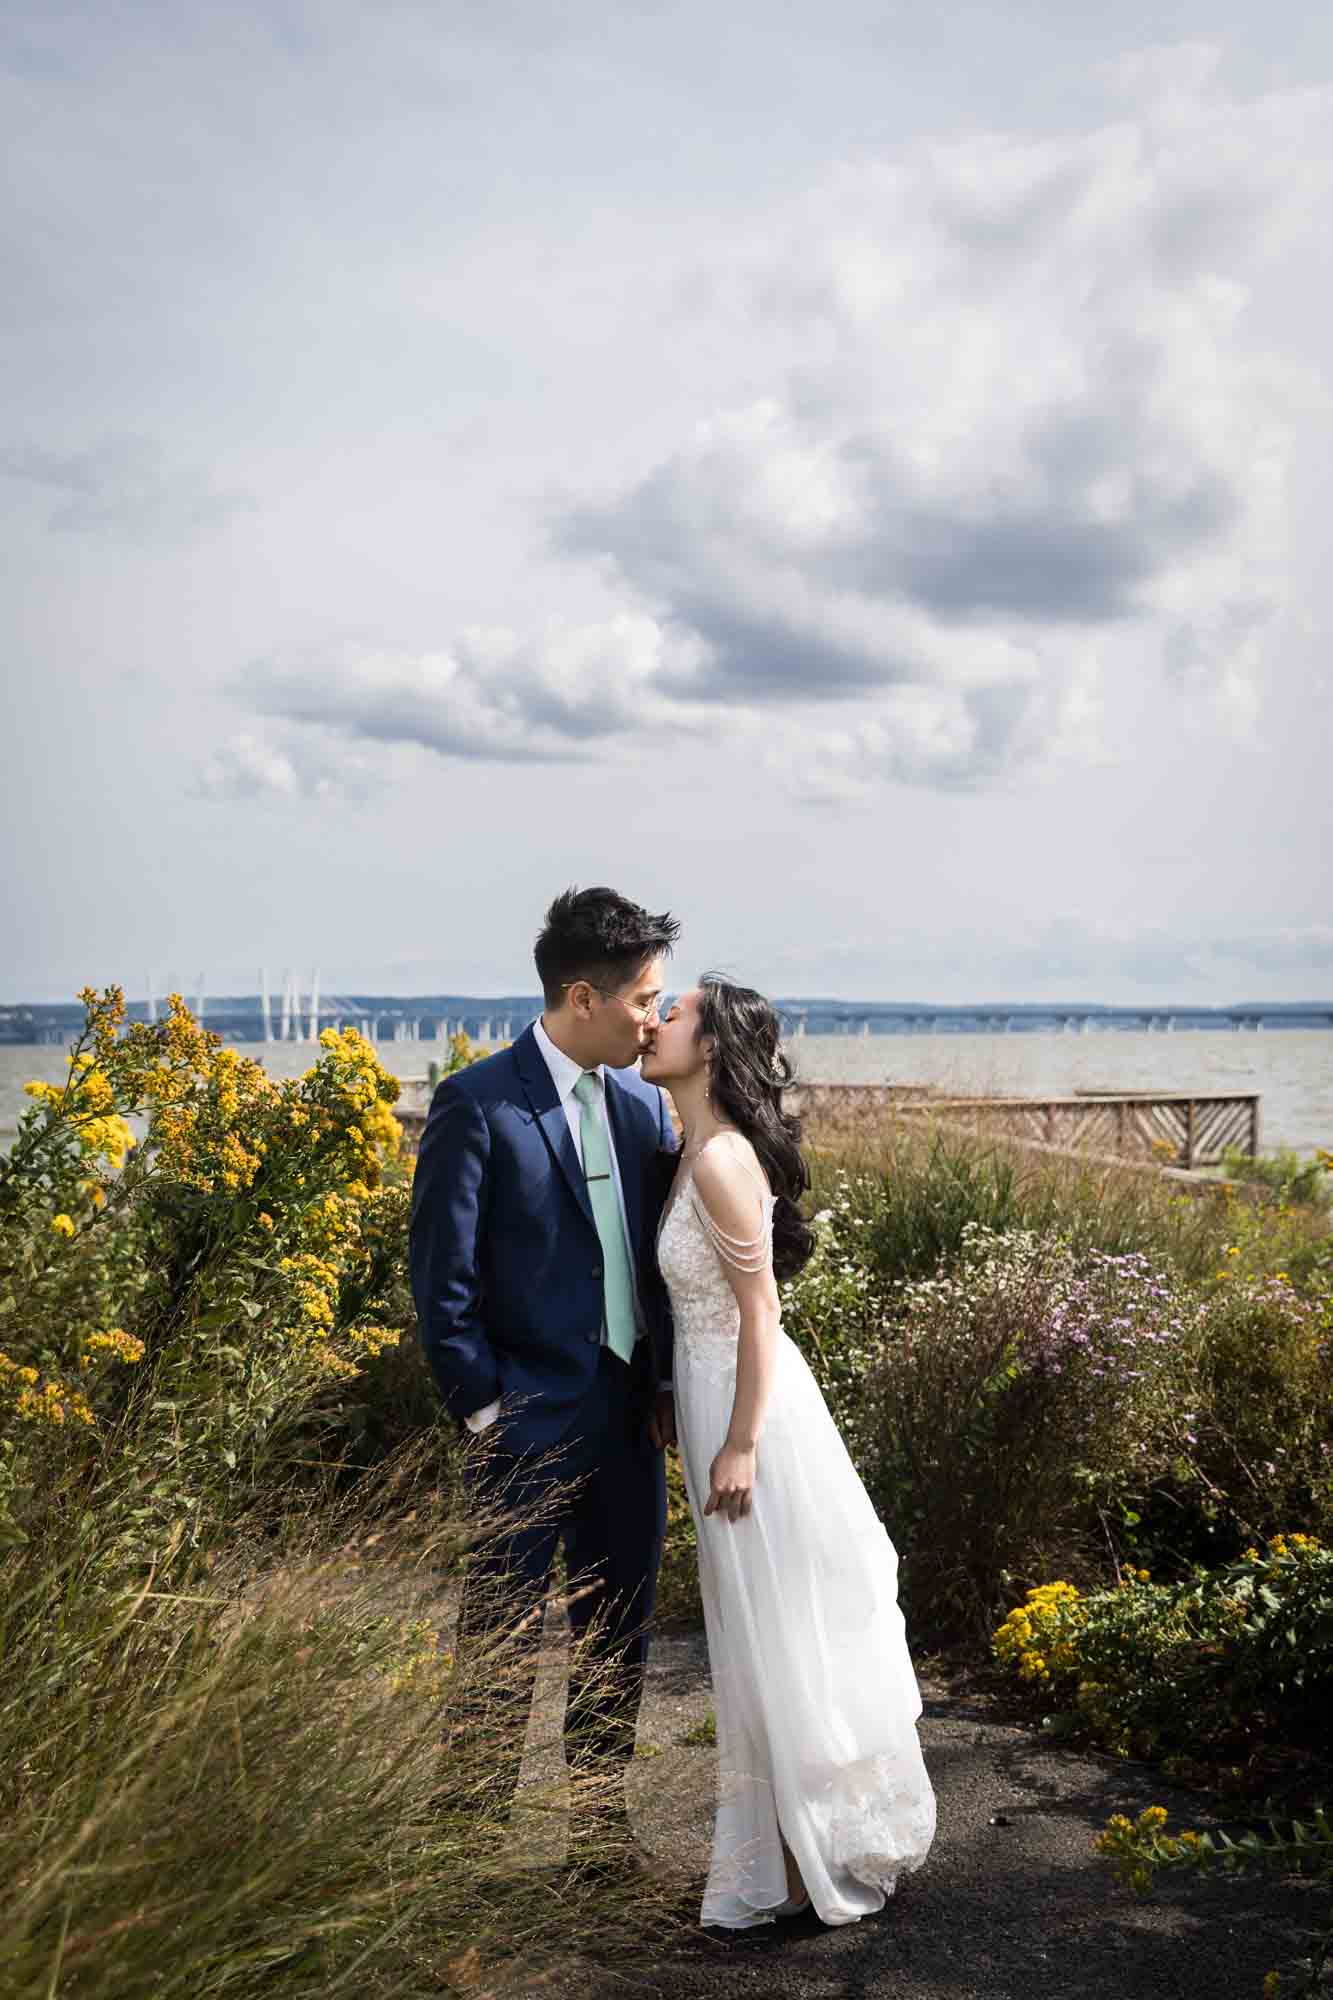 Bride and groom kissing on beach with bushes and clouds in background